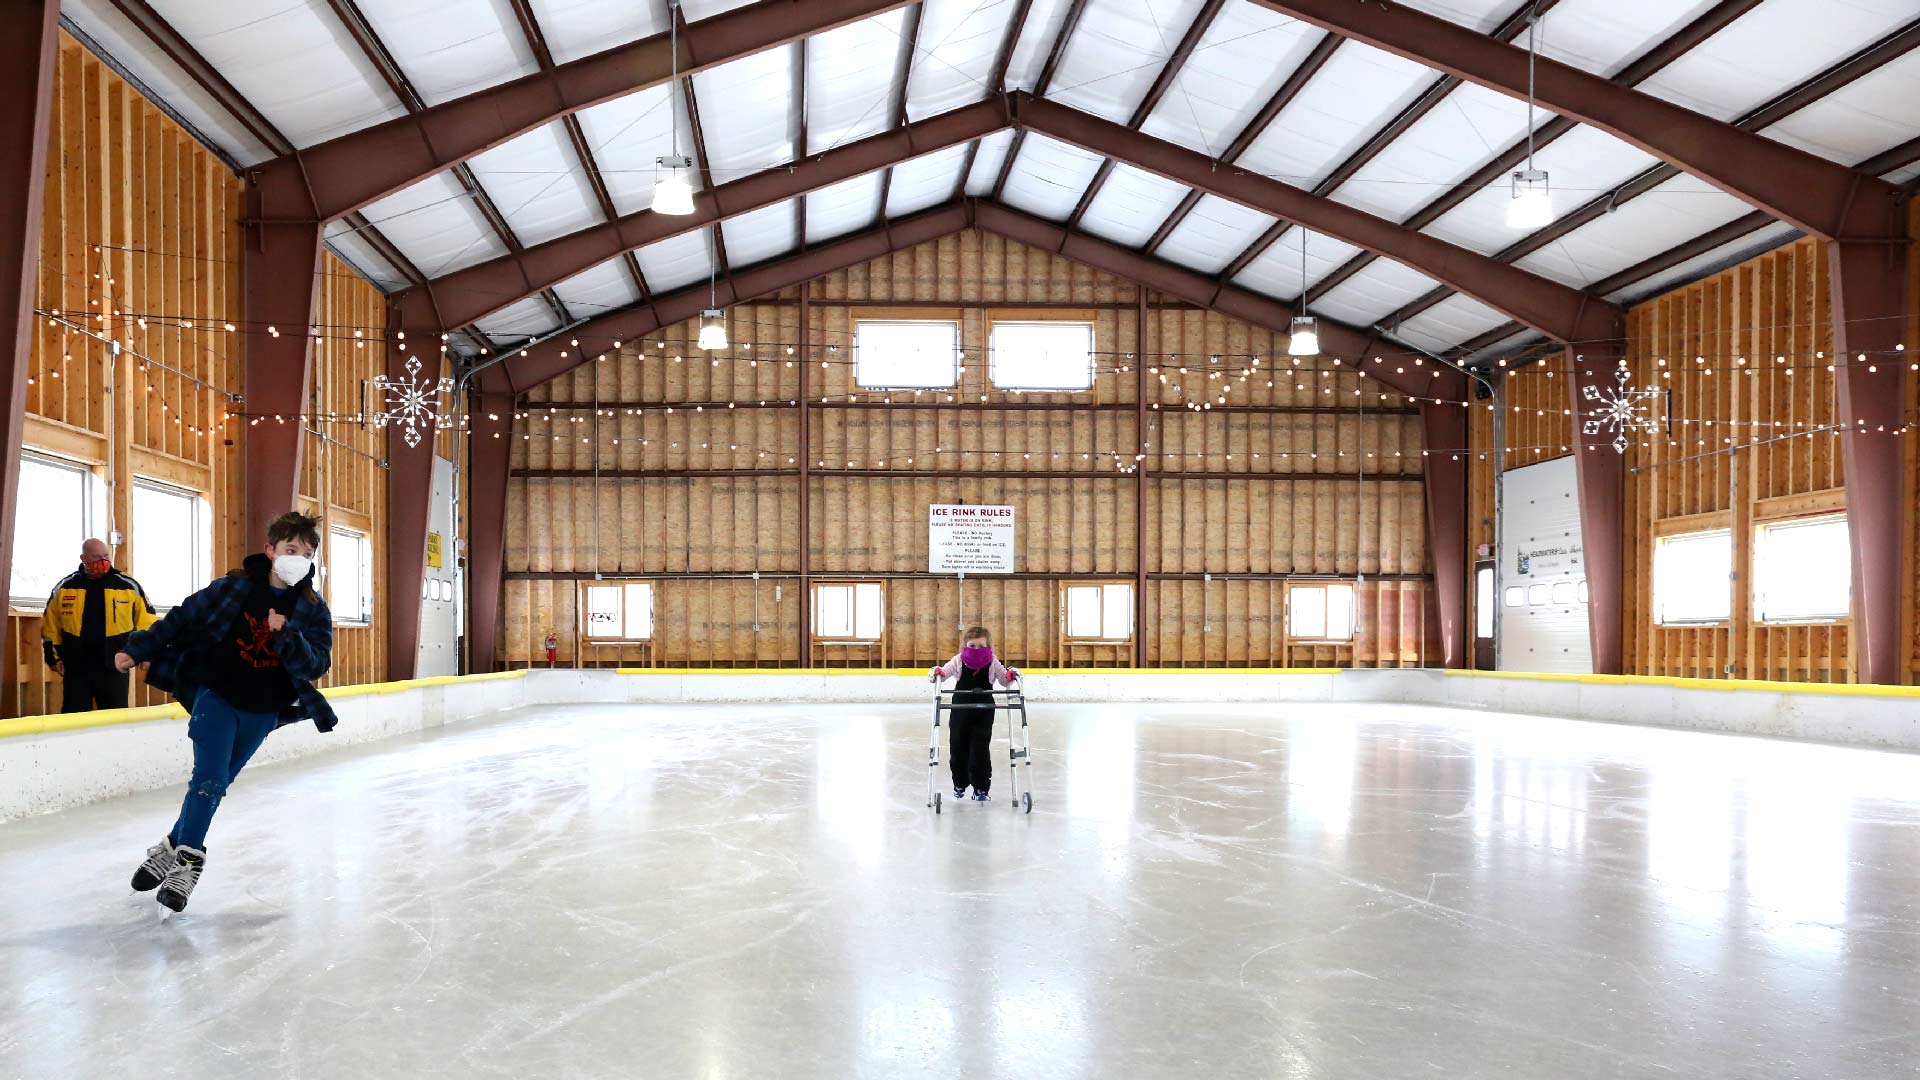 Snowflake Ice Rink is in Vilas County, WI